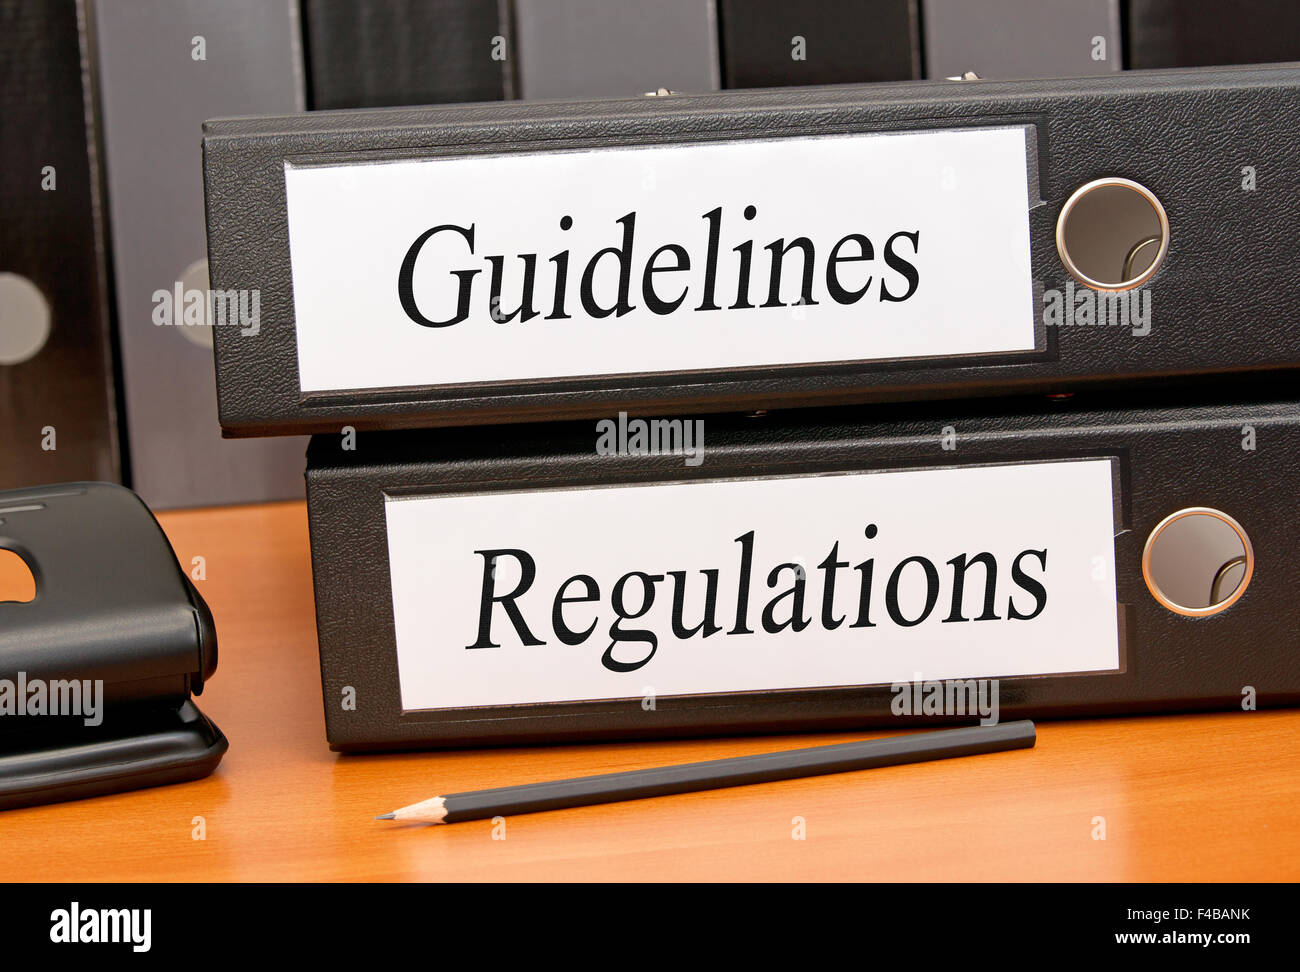 Guidelines and Regulations Stock Photo